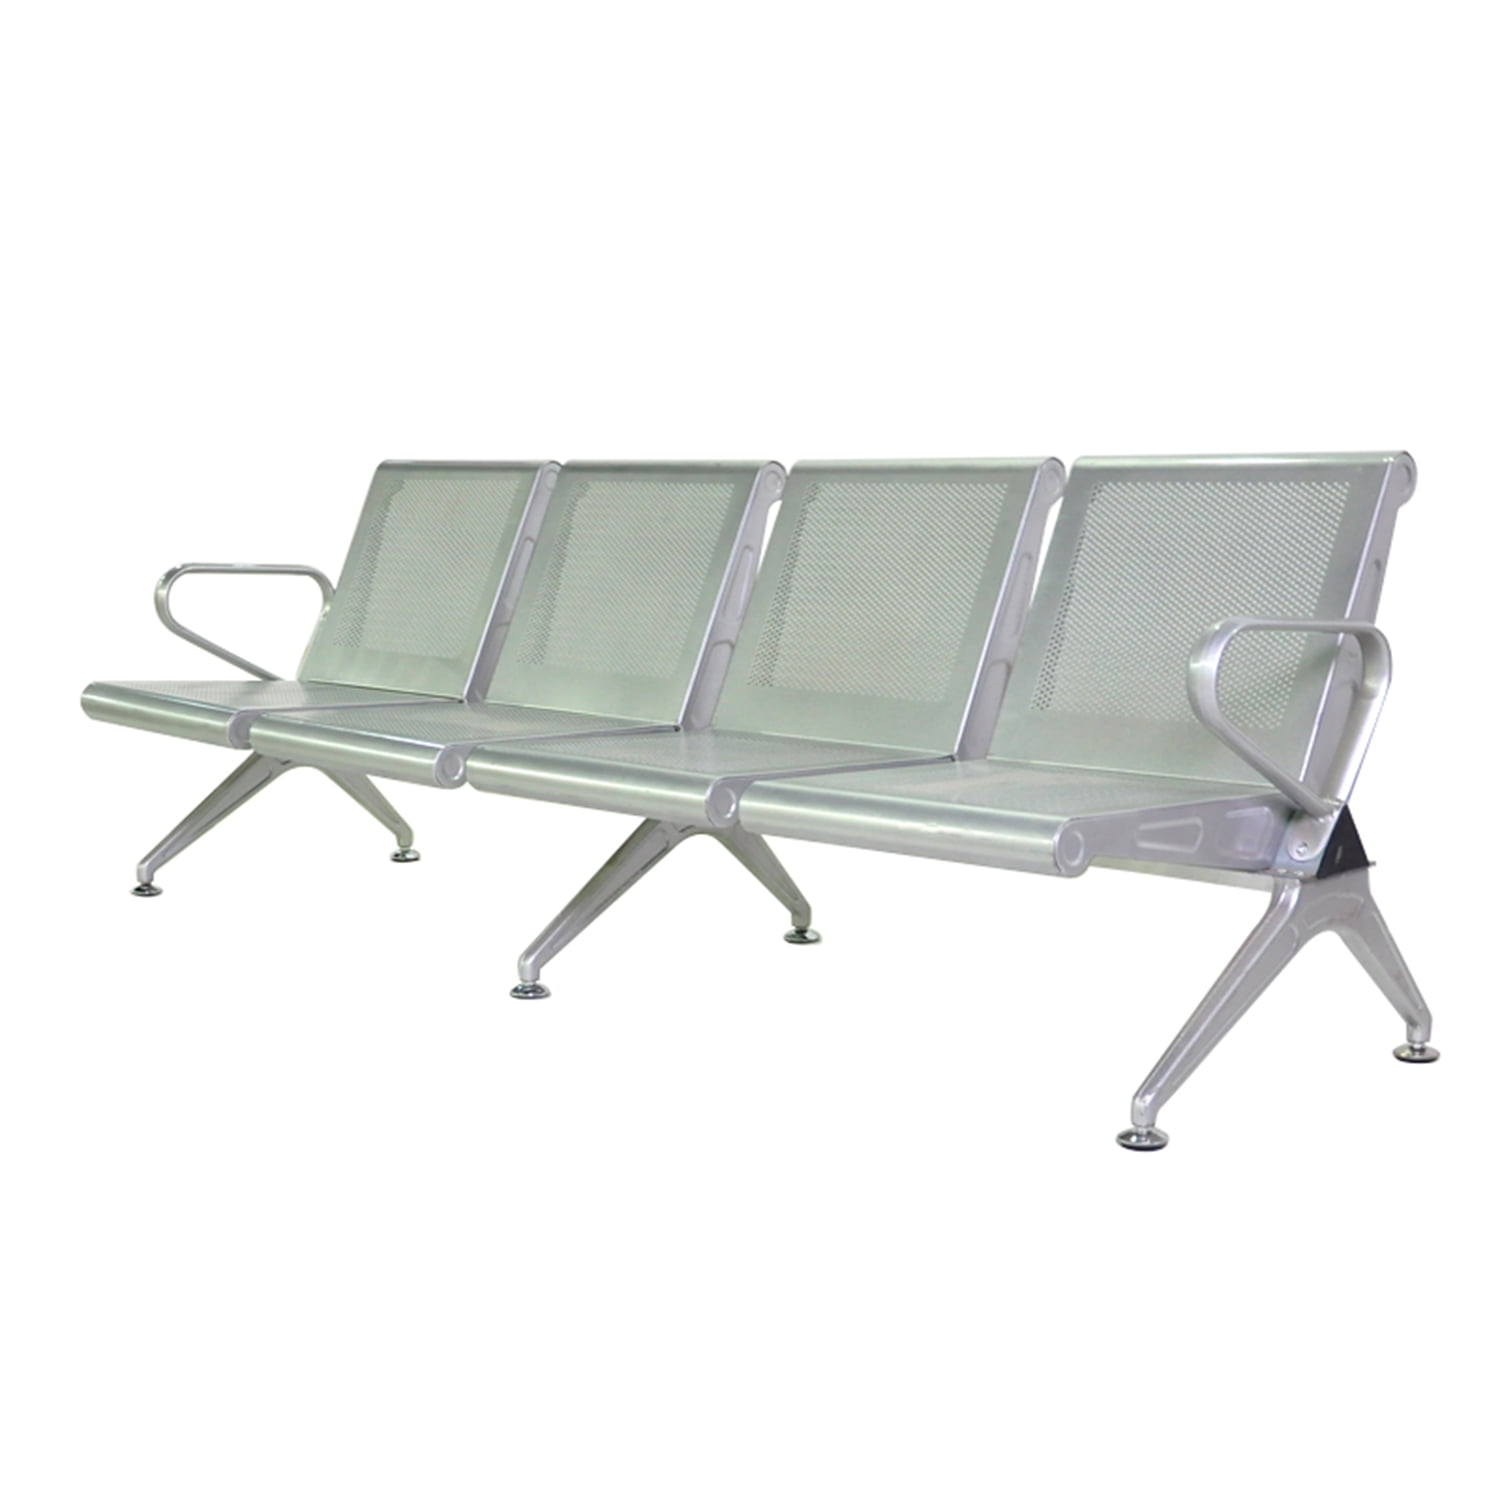 Airport Market Waiting Room Bench Seating with Back Airport Bench Seating Reception Chairs for Business Office Hospital Barbershop